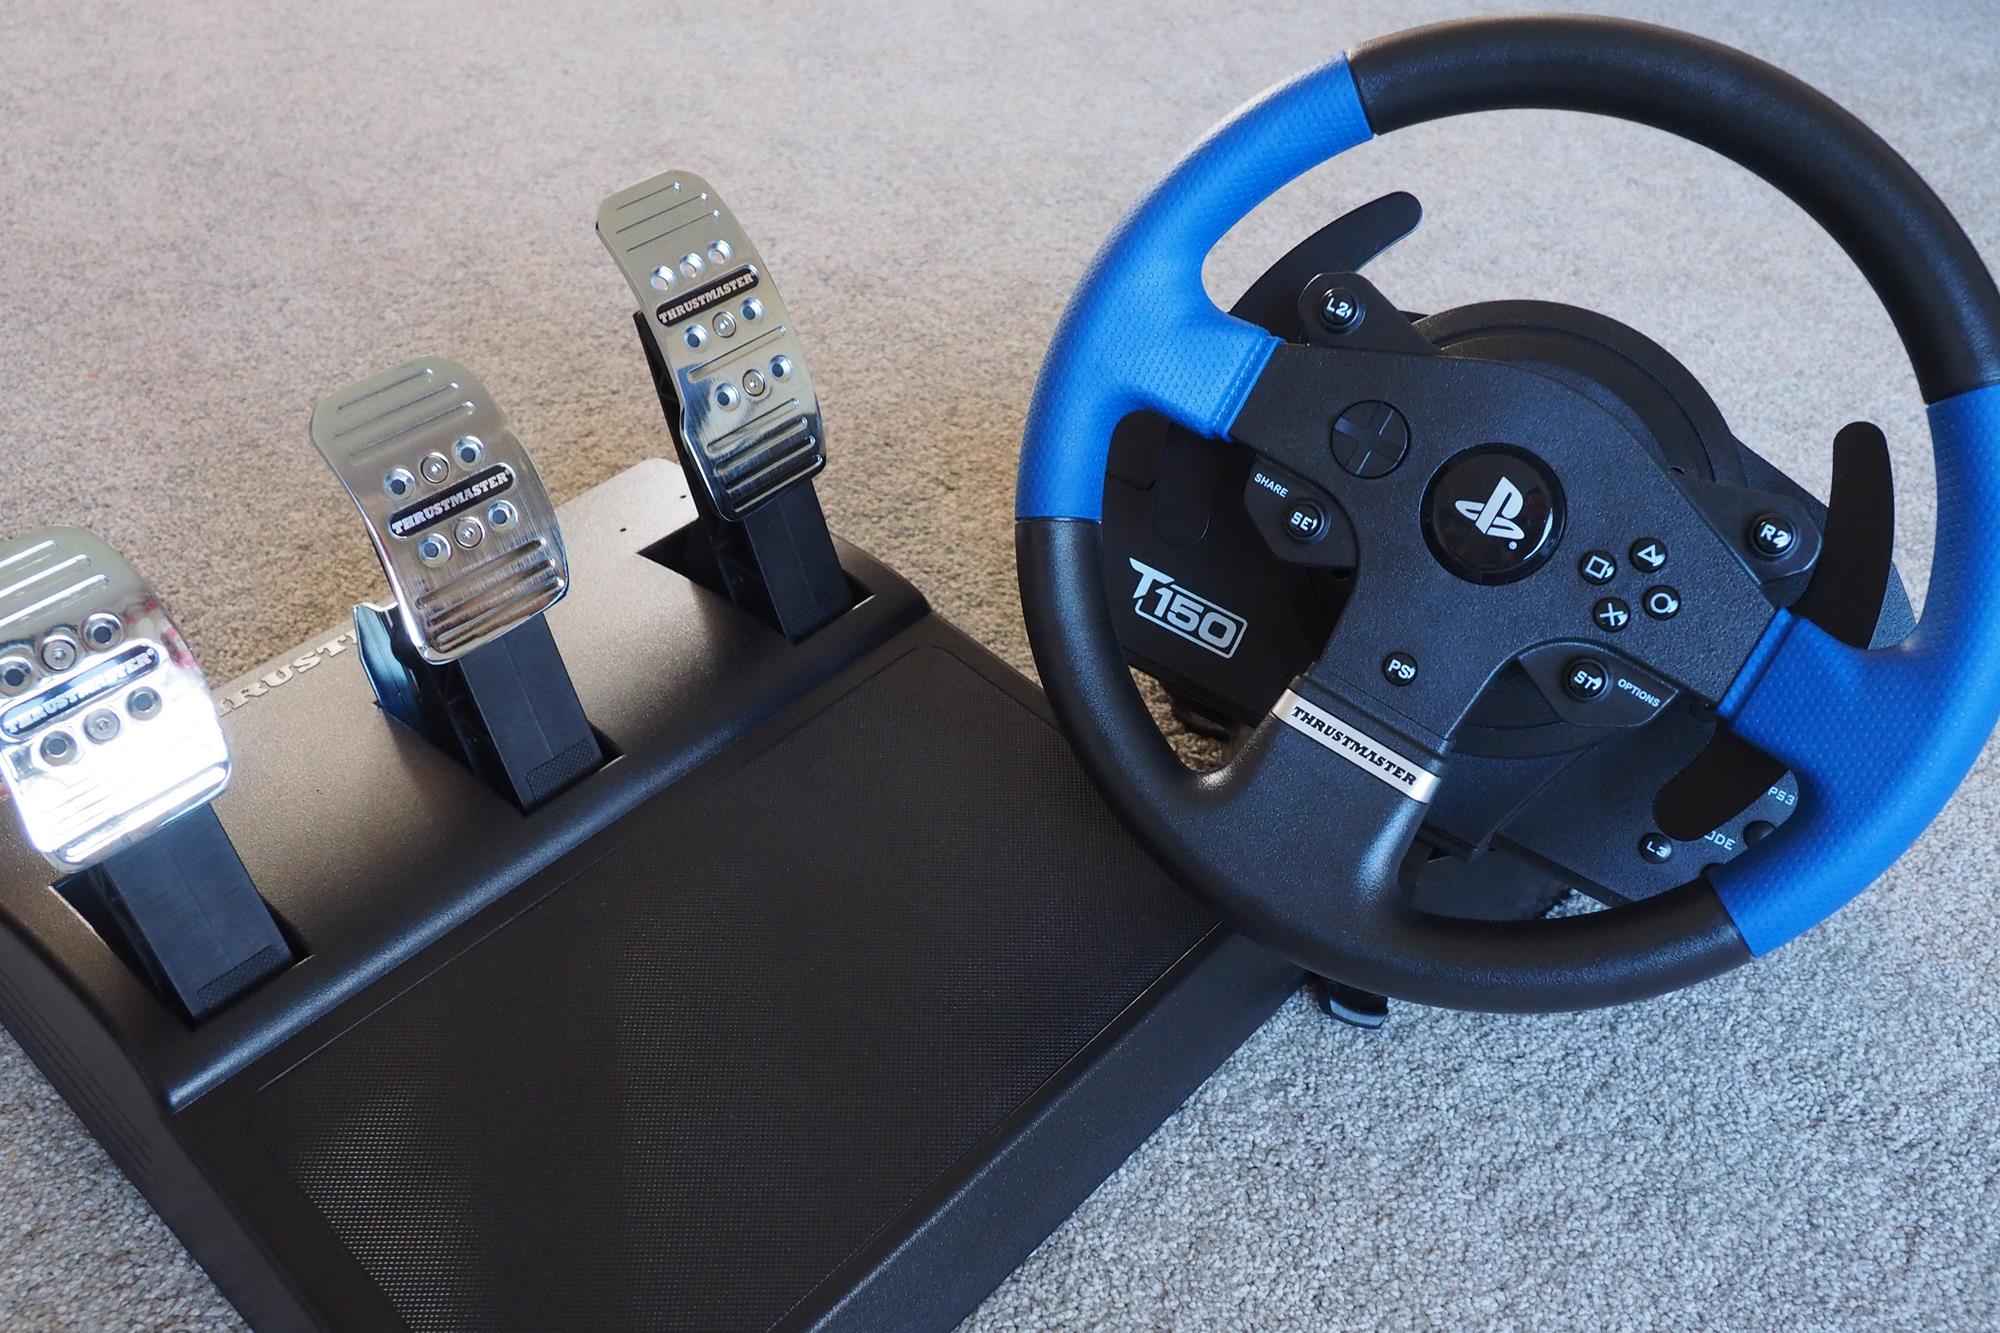 Refrein silhouet Pamflet Thrustmaster T150 Pro Review | Trusted Reviews